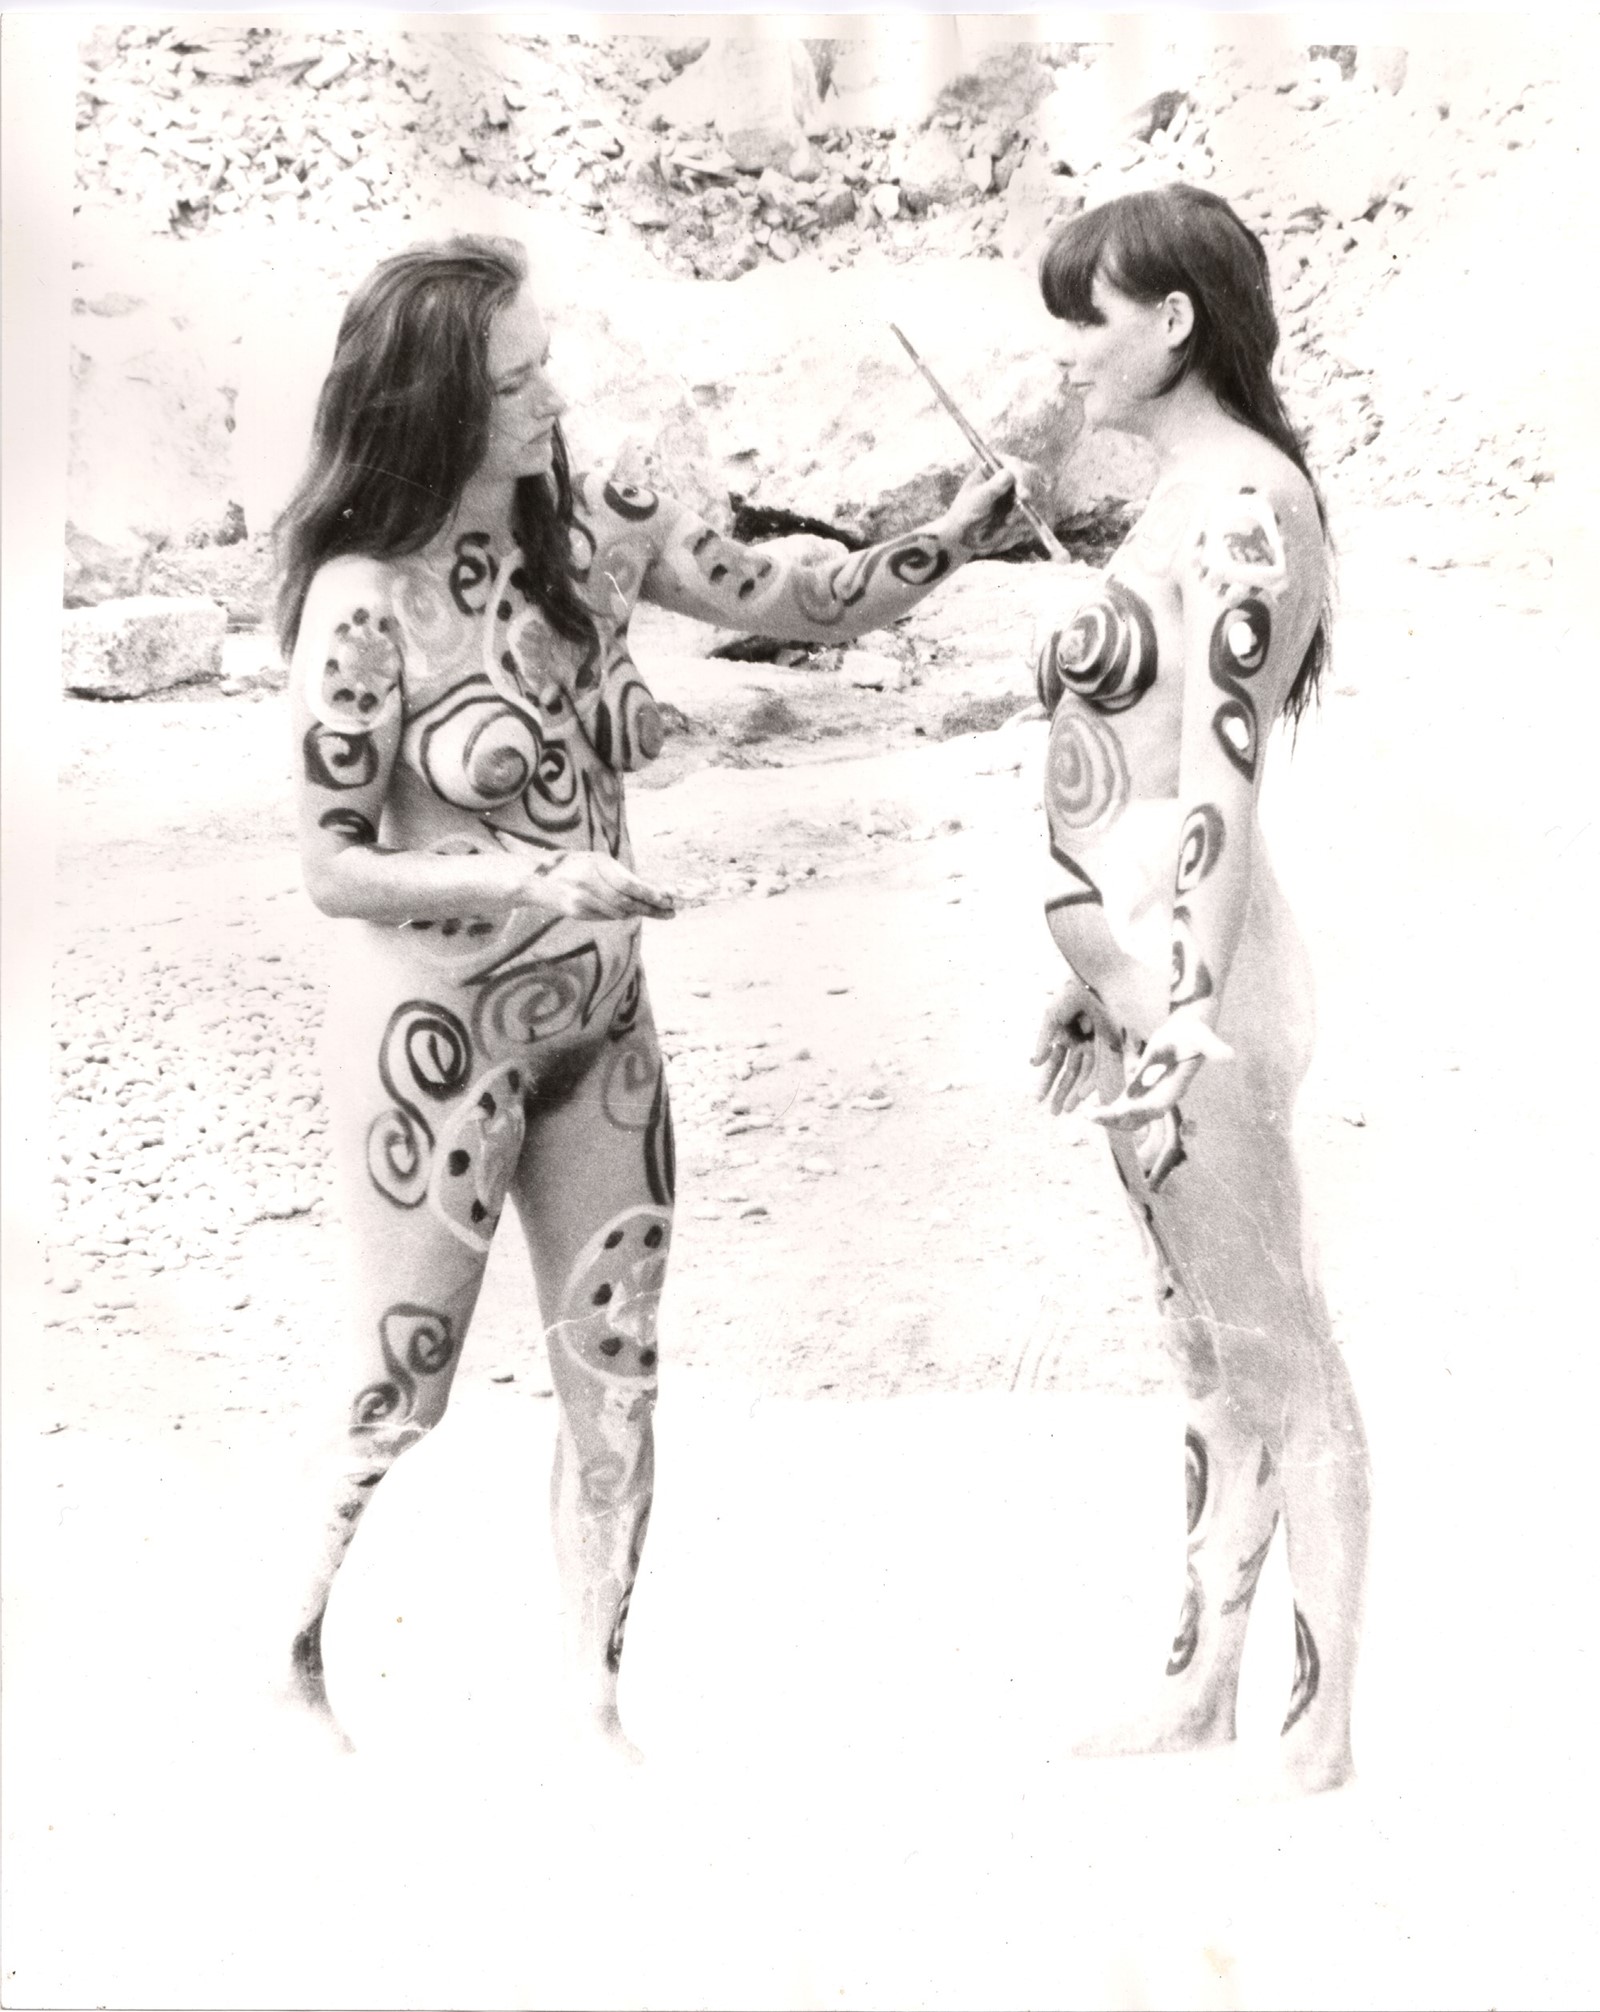 Neo Naturists, Sexist Crabs and The Cosmic Egg, Po